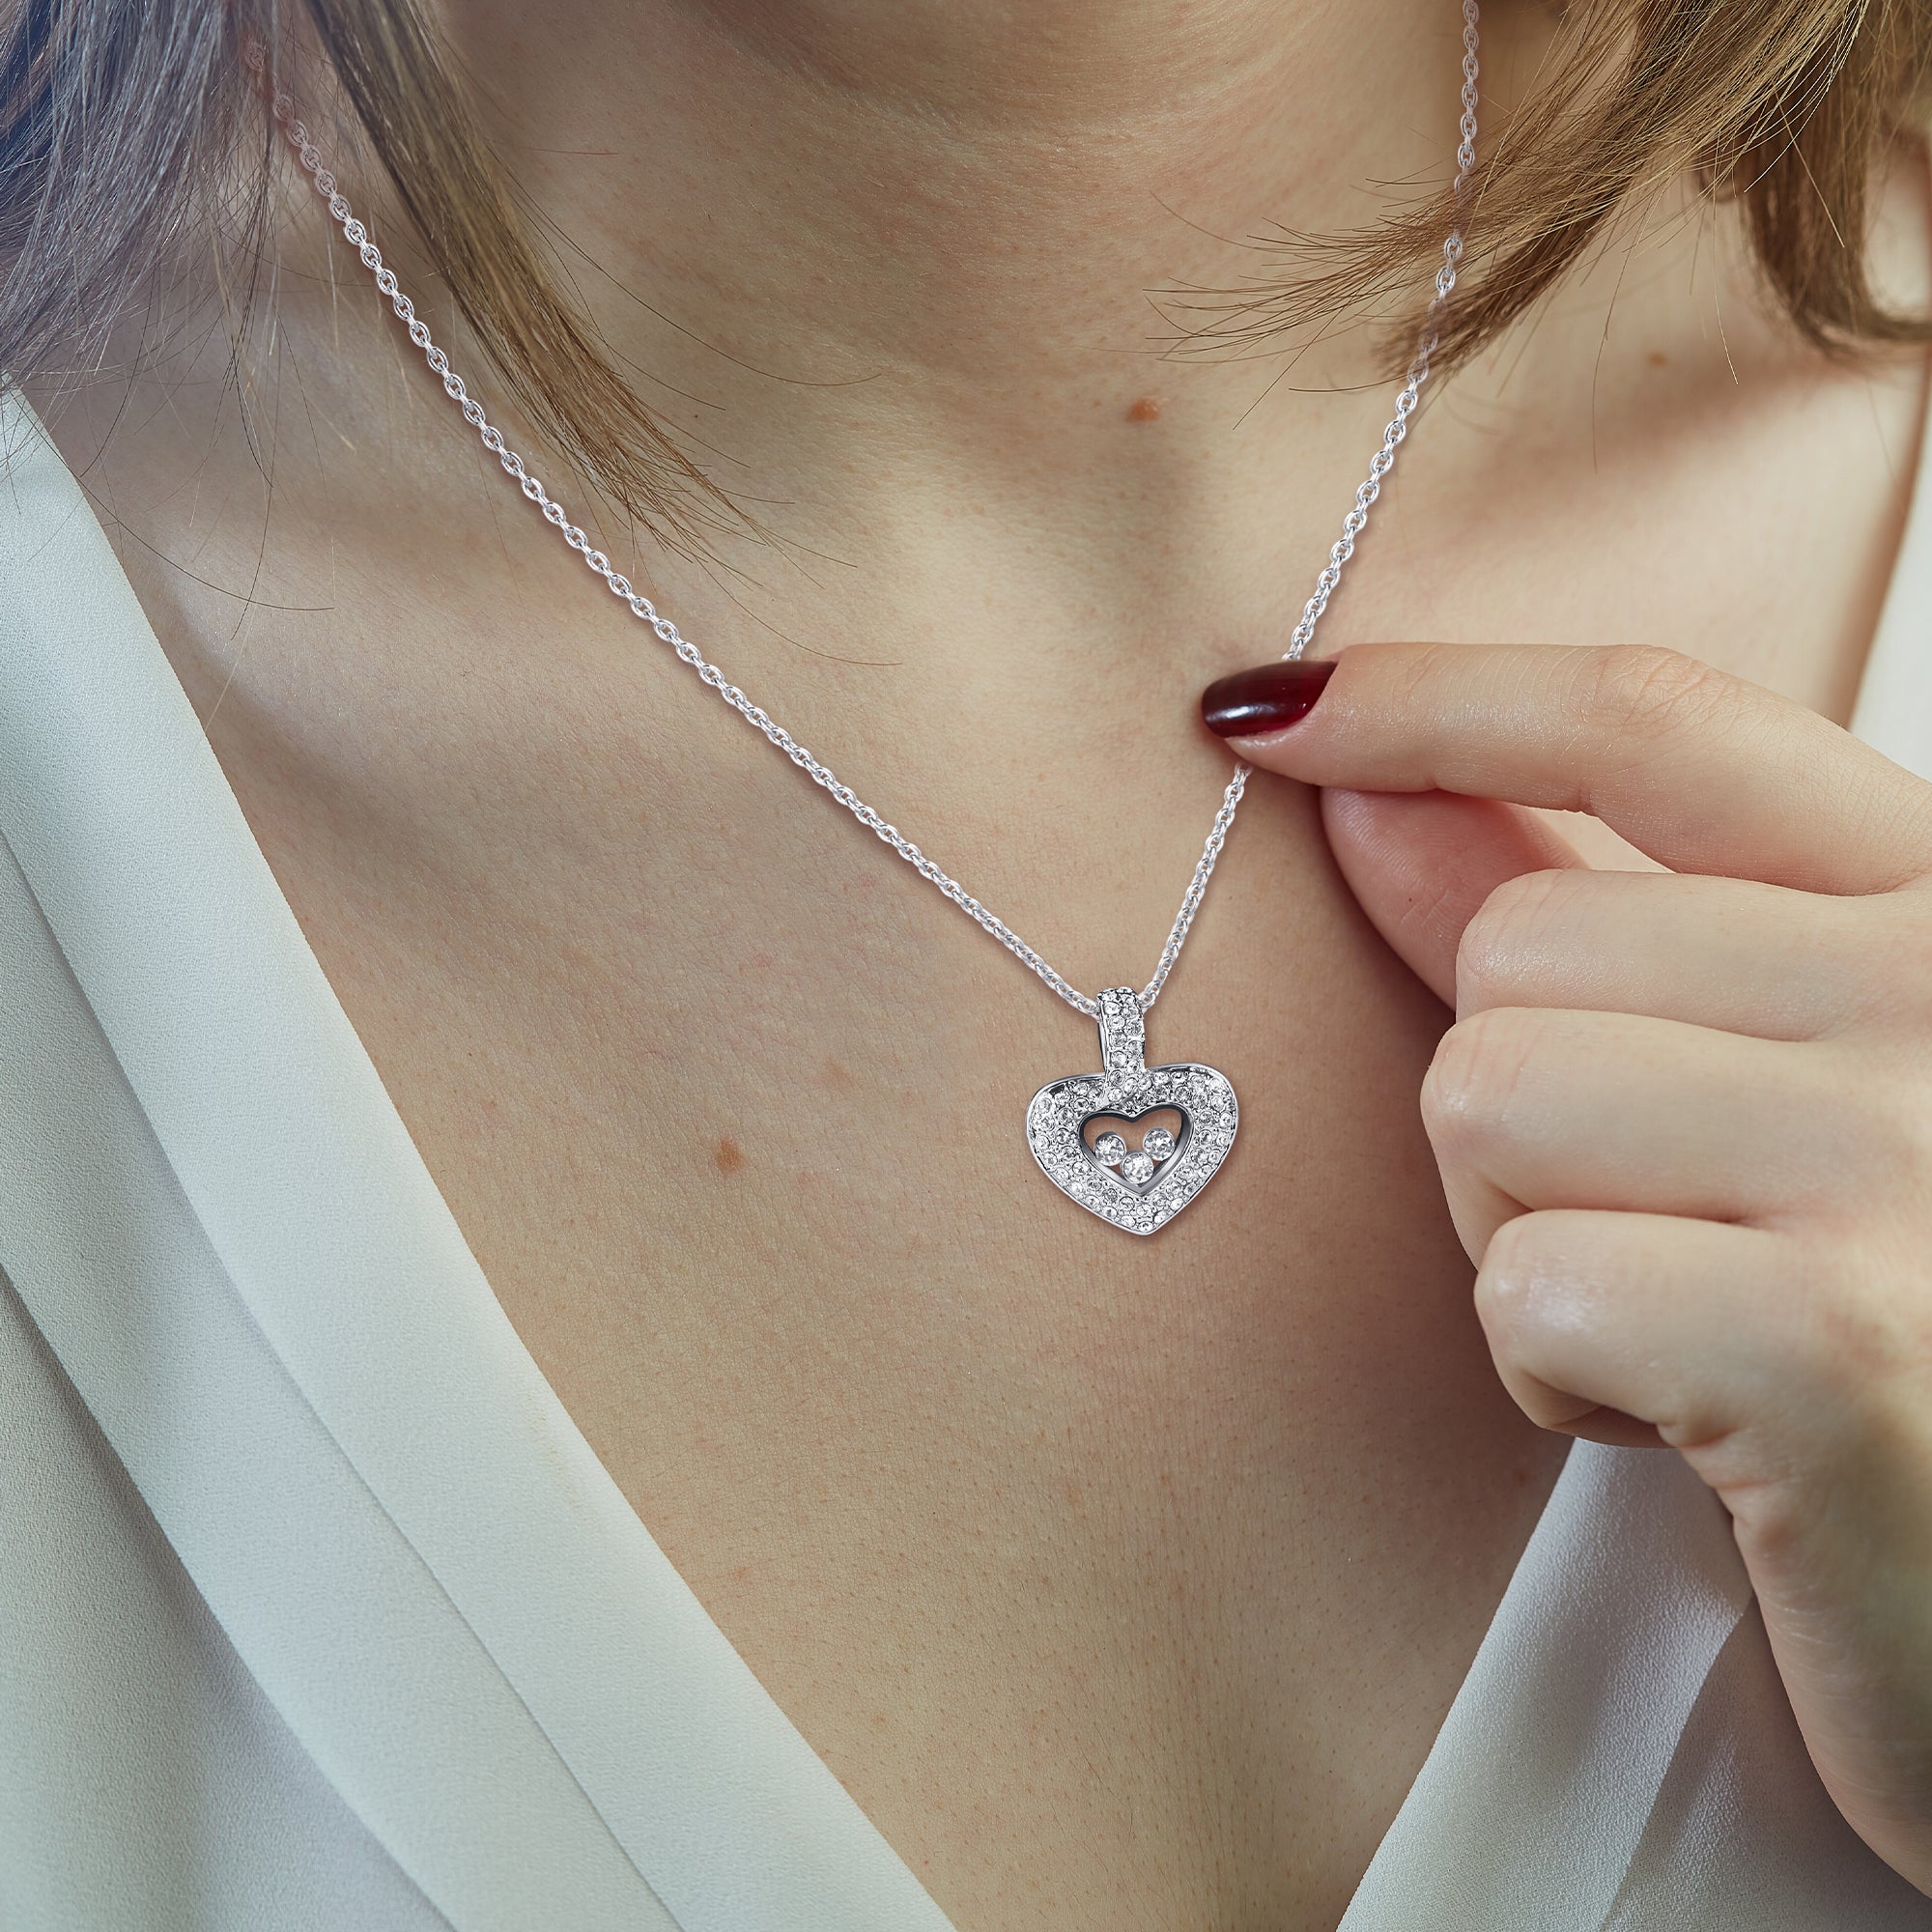 To My Bonus Daughter - You Have My Heart. Support - Tryndi Floating Heart Necklace